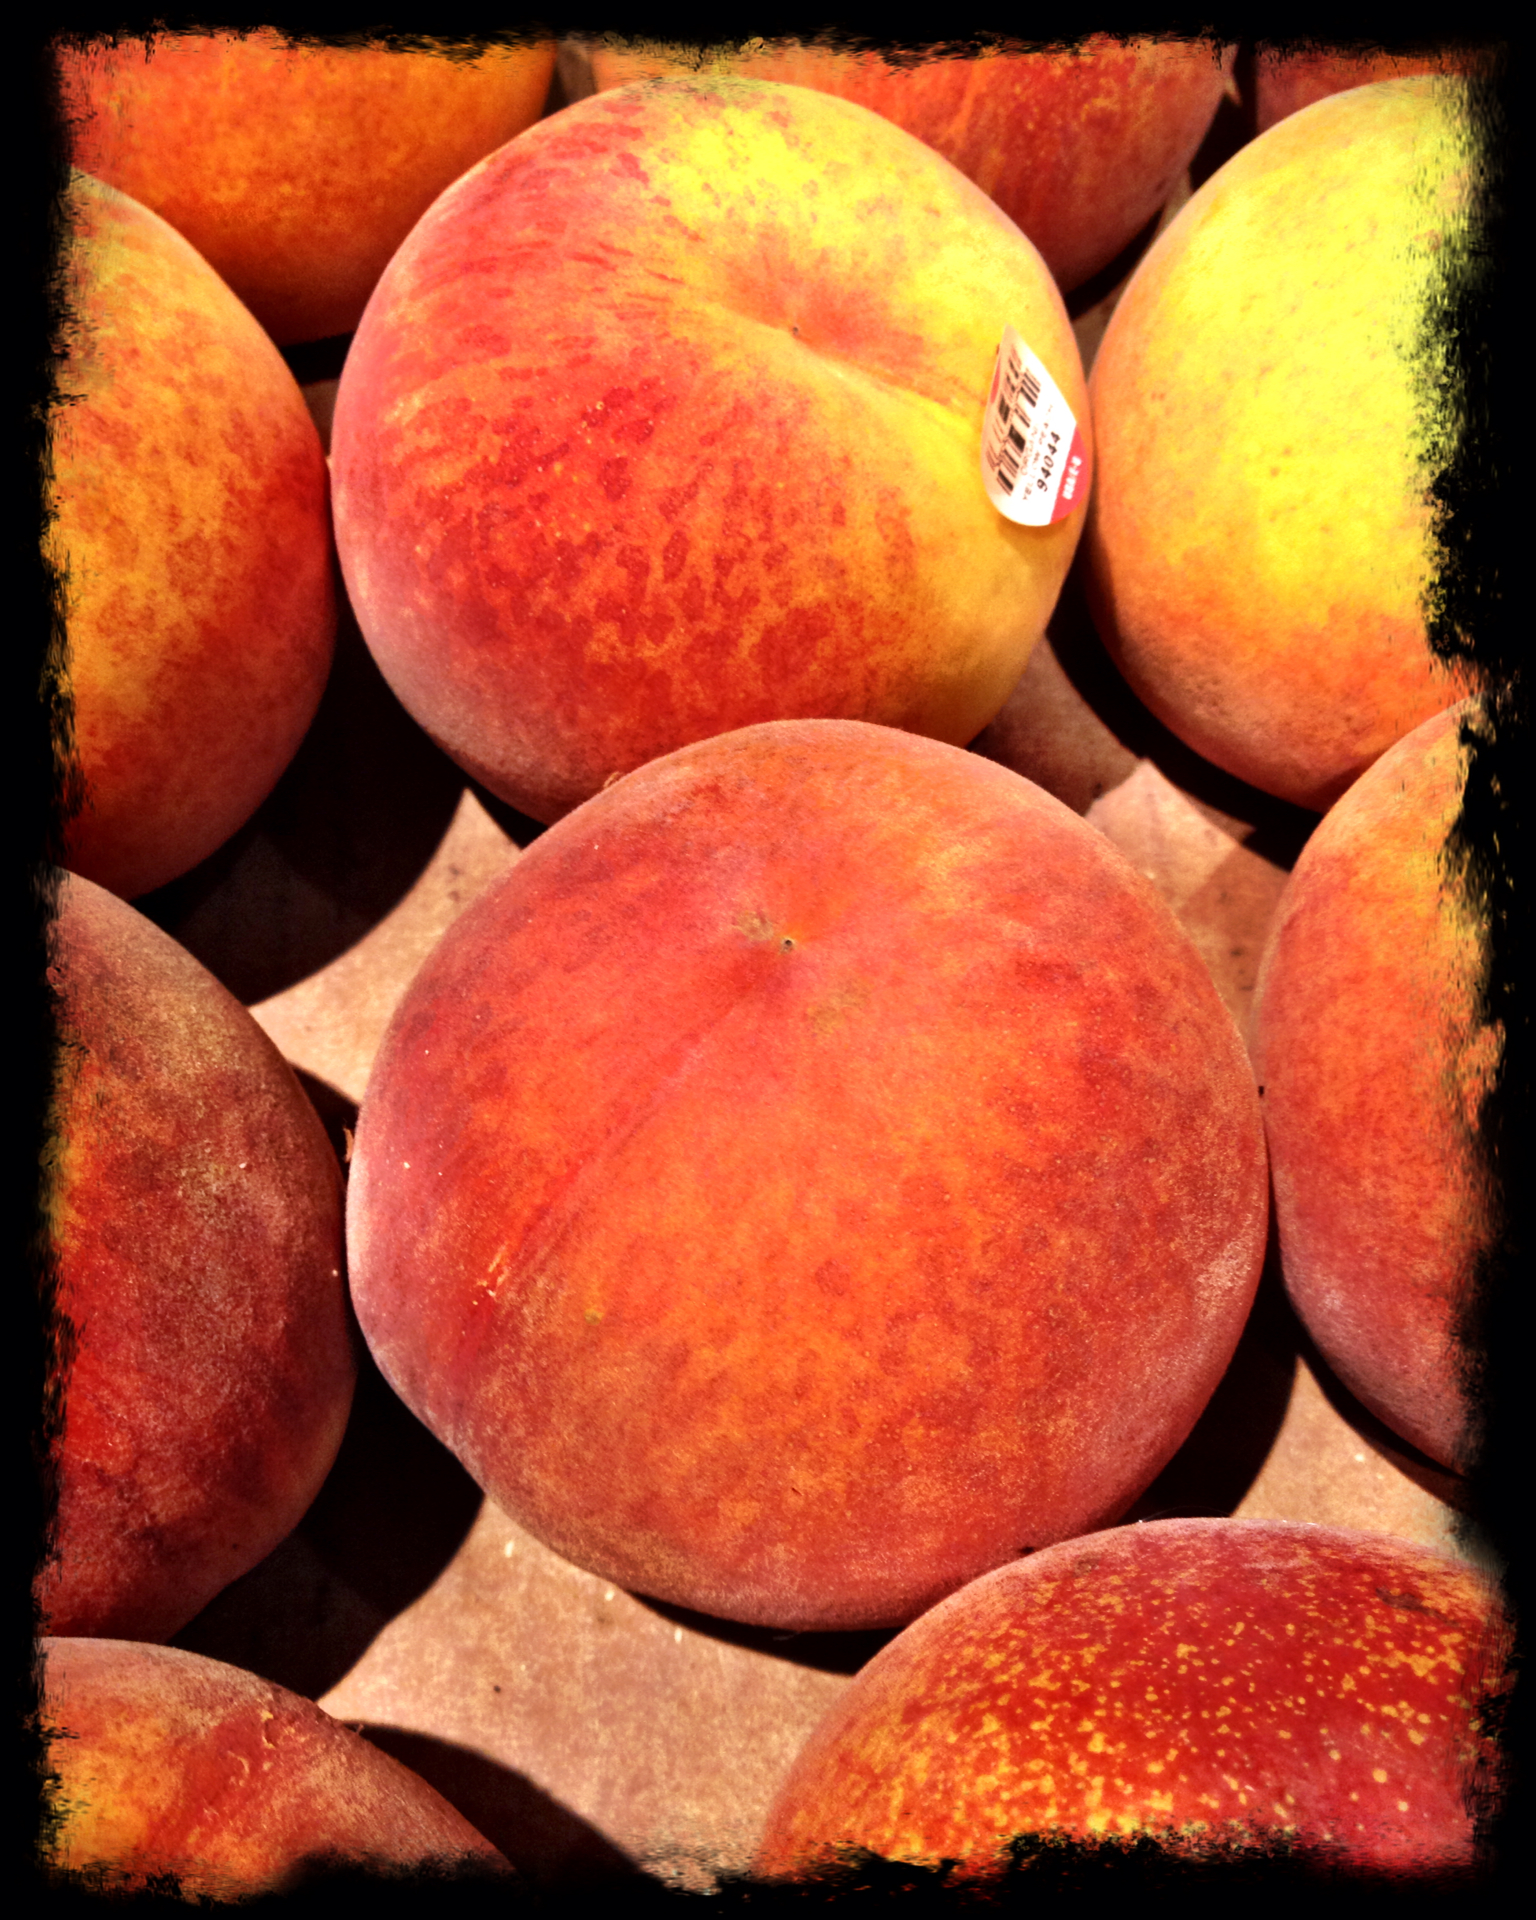 a bunch of peaches sitting together in a pile